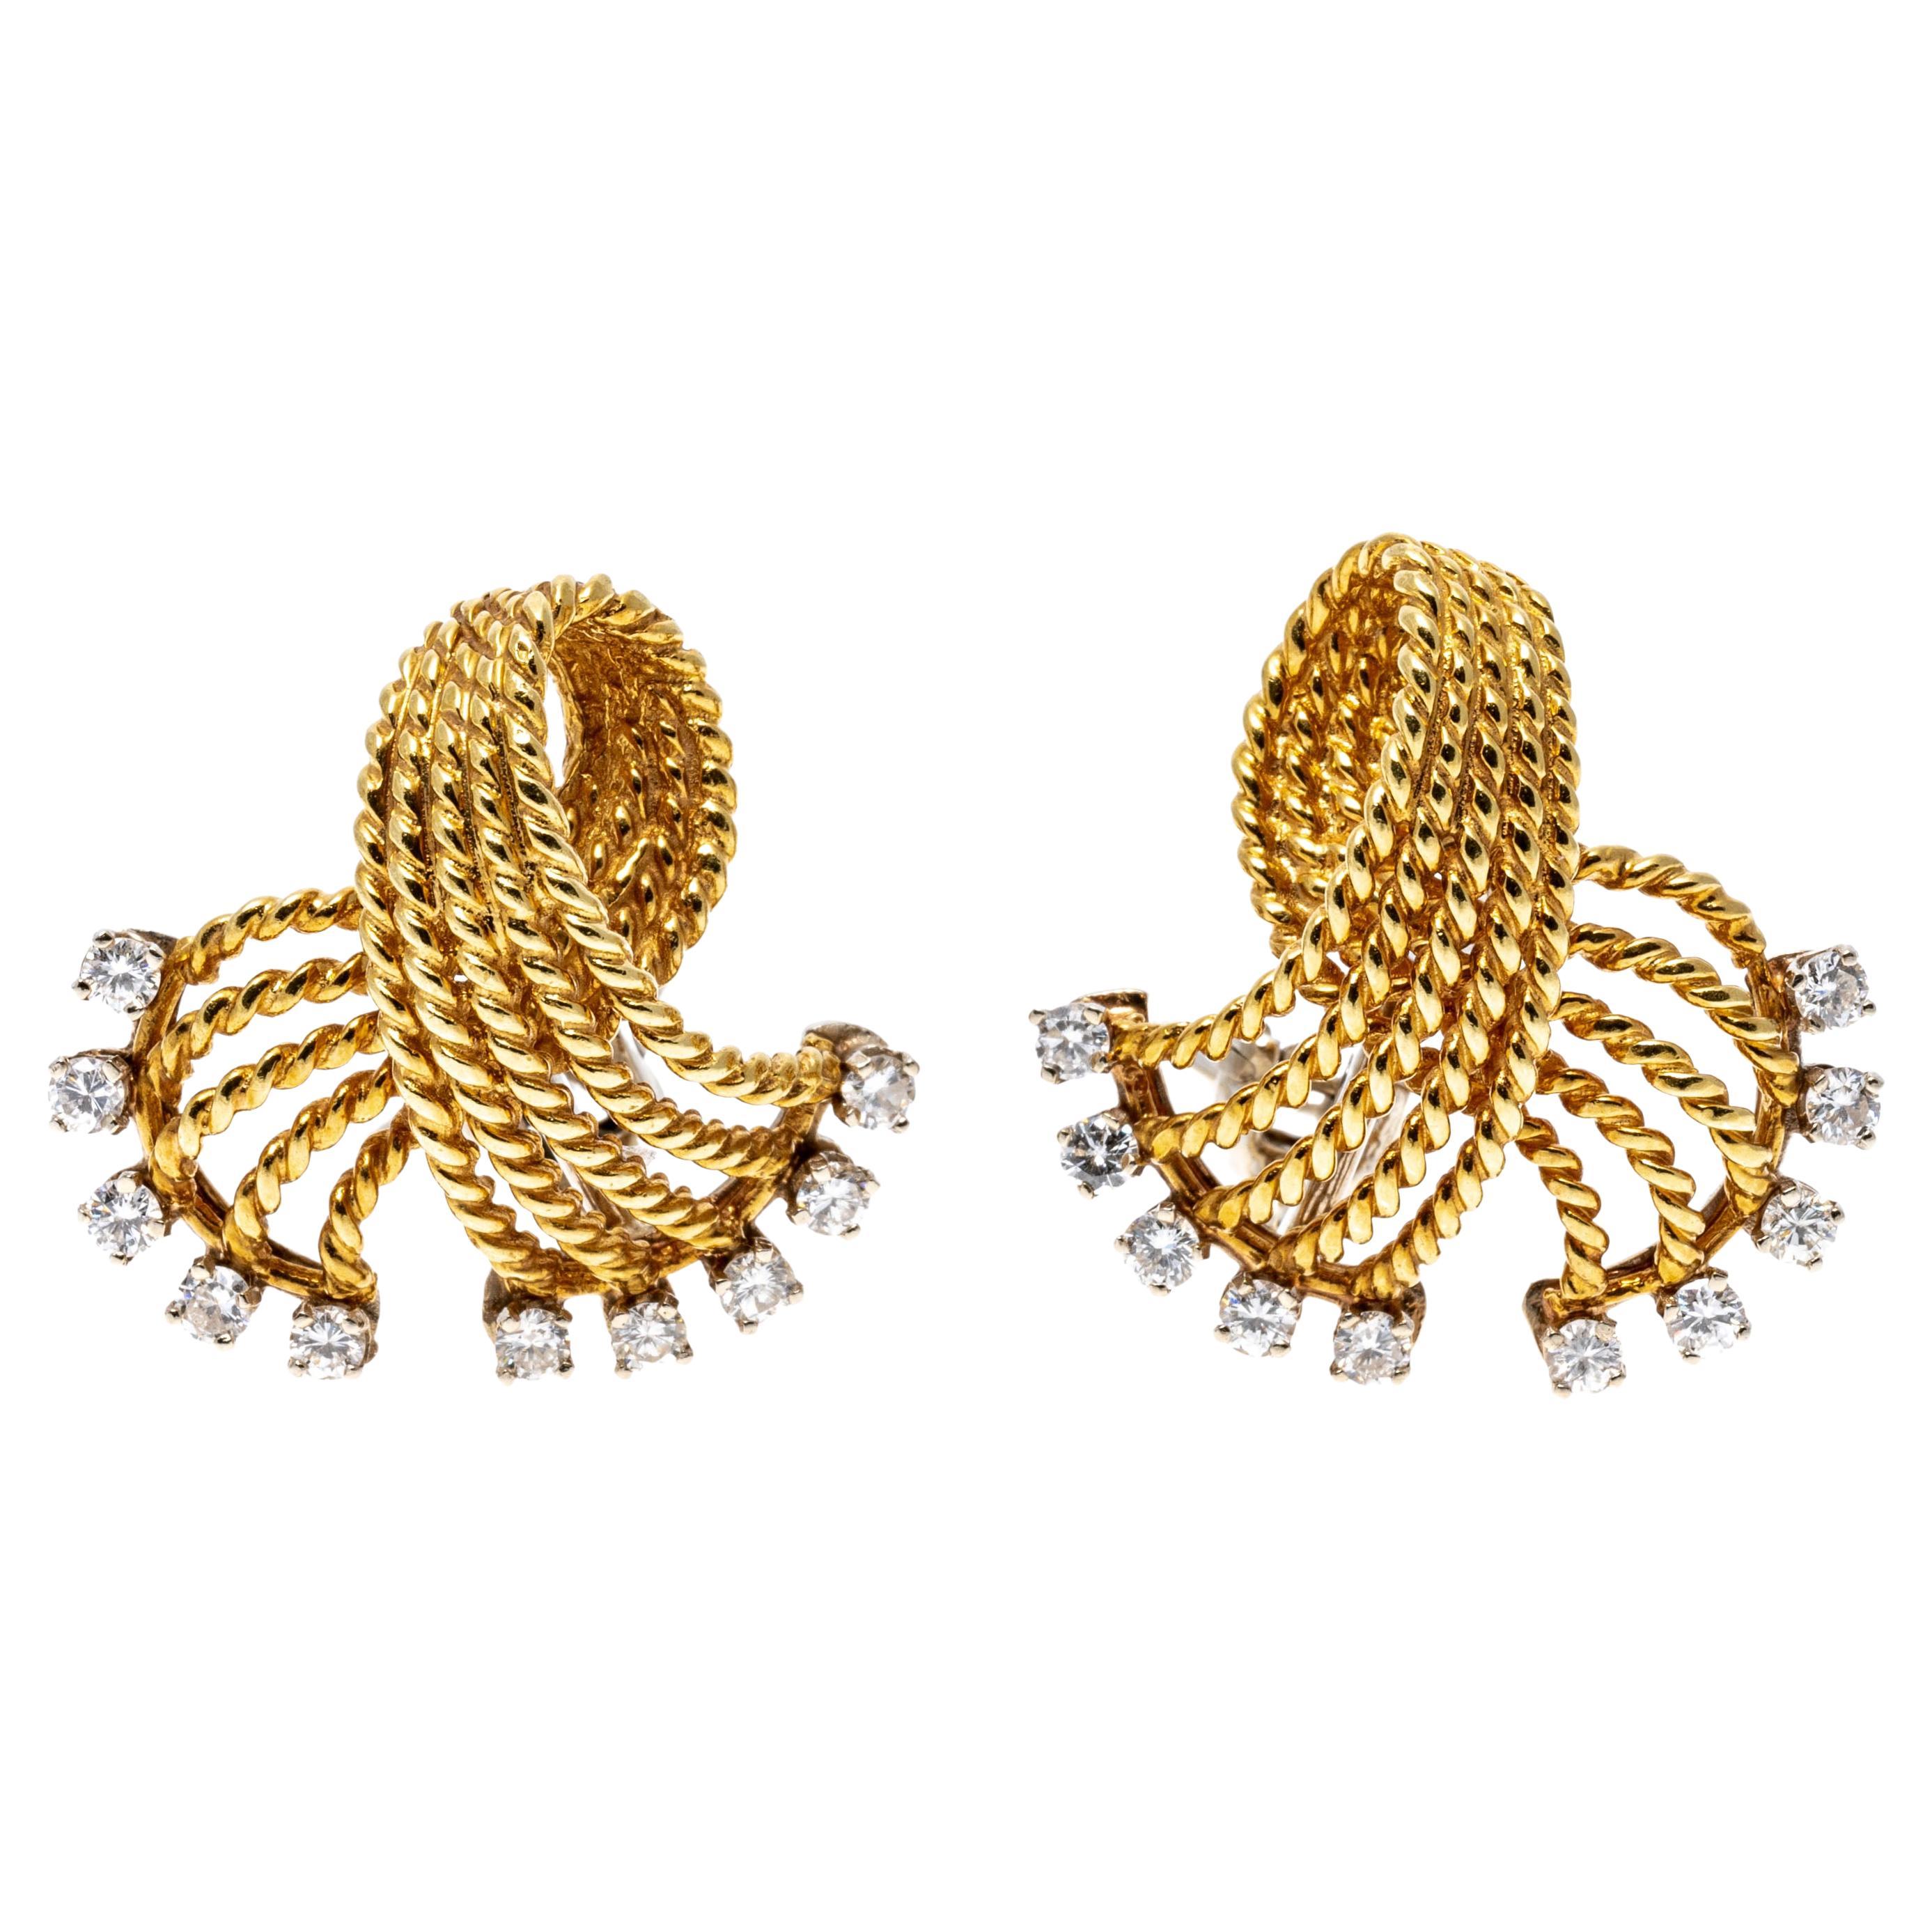 18K Yellow Gold Braided Folded Knot Earrings with Diamonds, App. 0.50 TCW For Sale